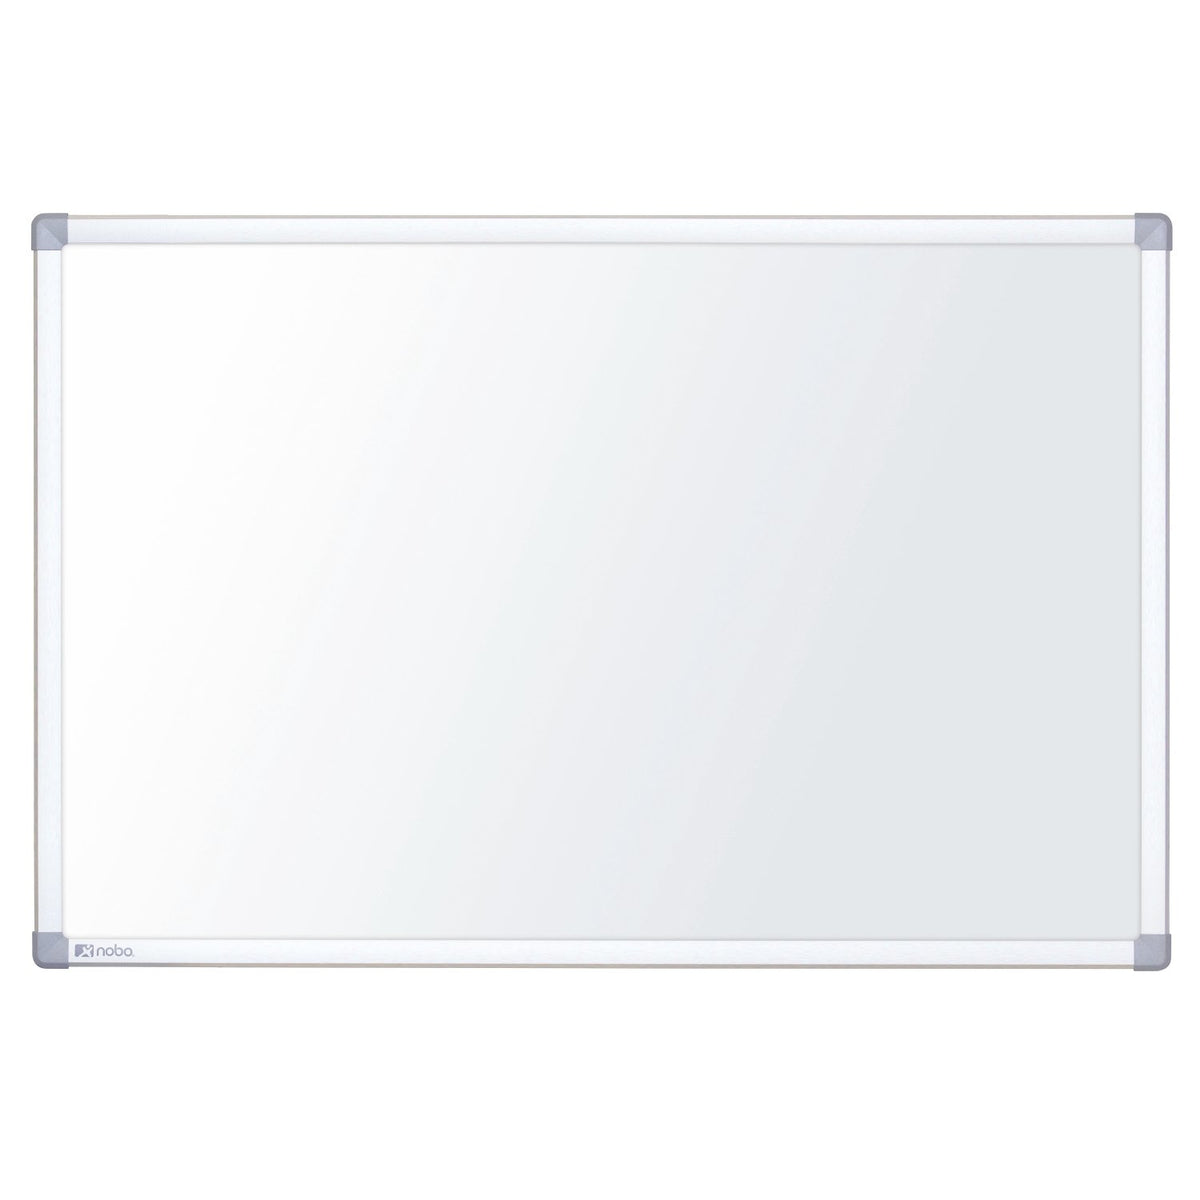 Nobo Nano Clean - White board - wall mountable - 1800 x 900 mm - painted steel - magnetic - white - silver aluminum frame